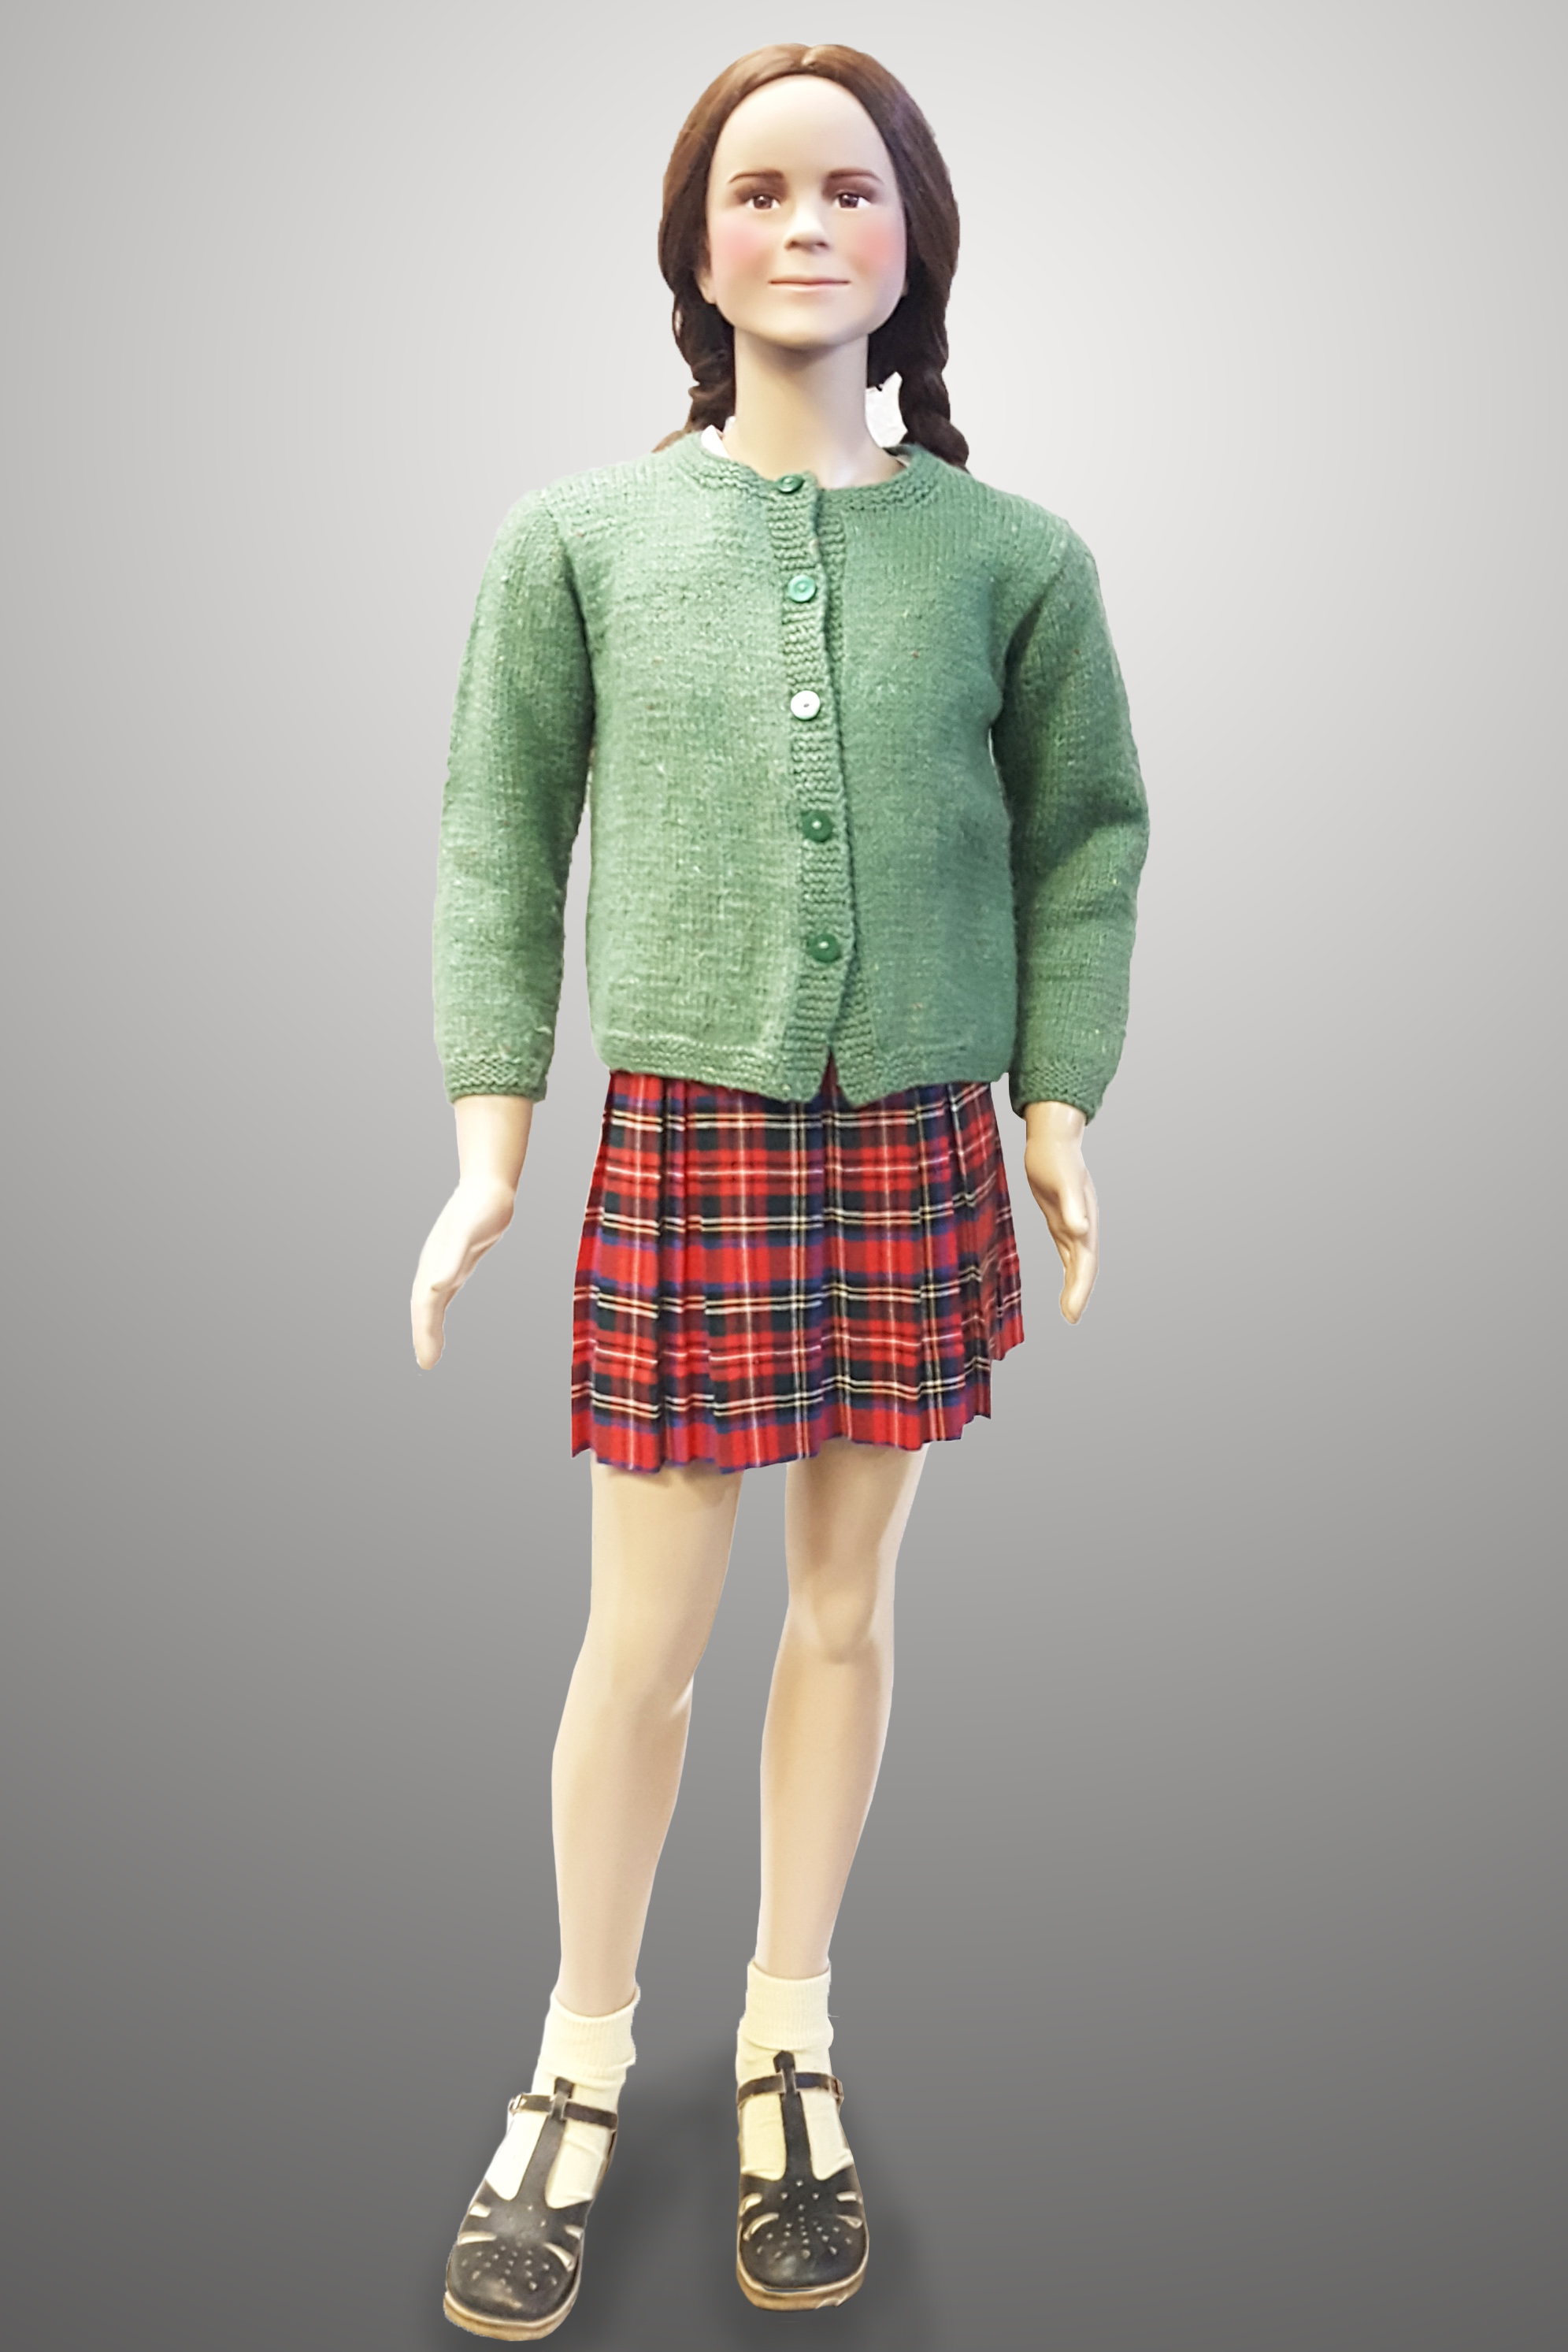 Girl with Green Cardie